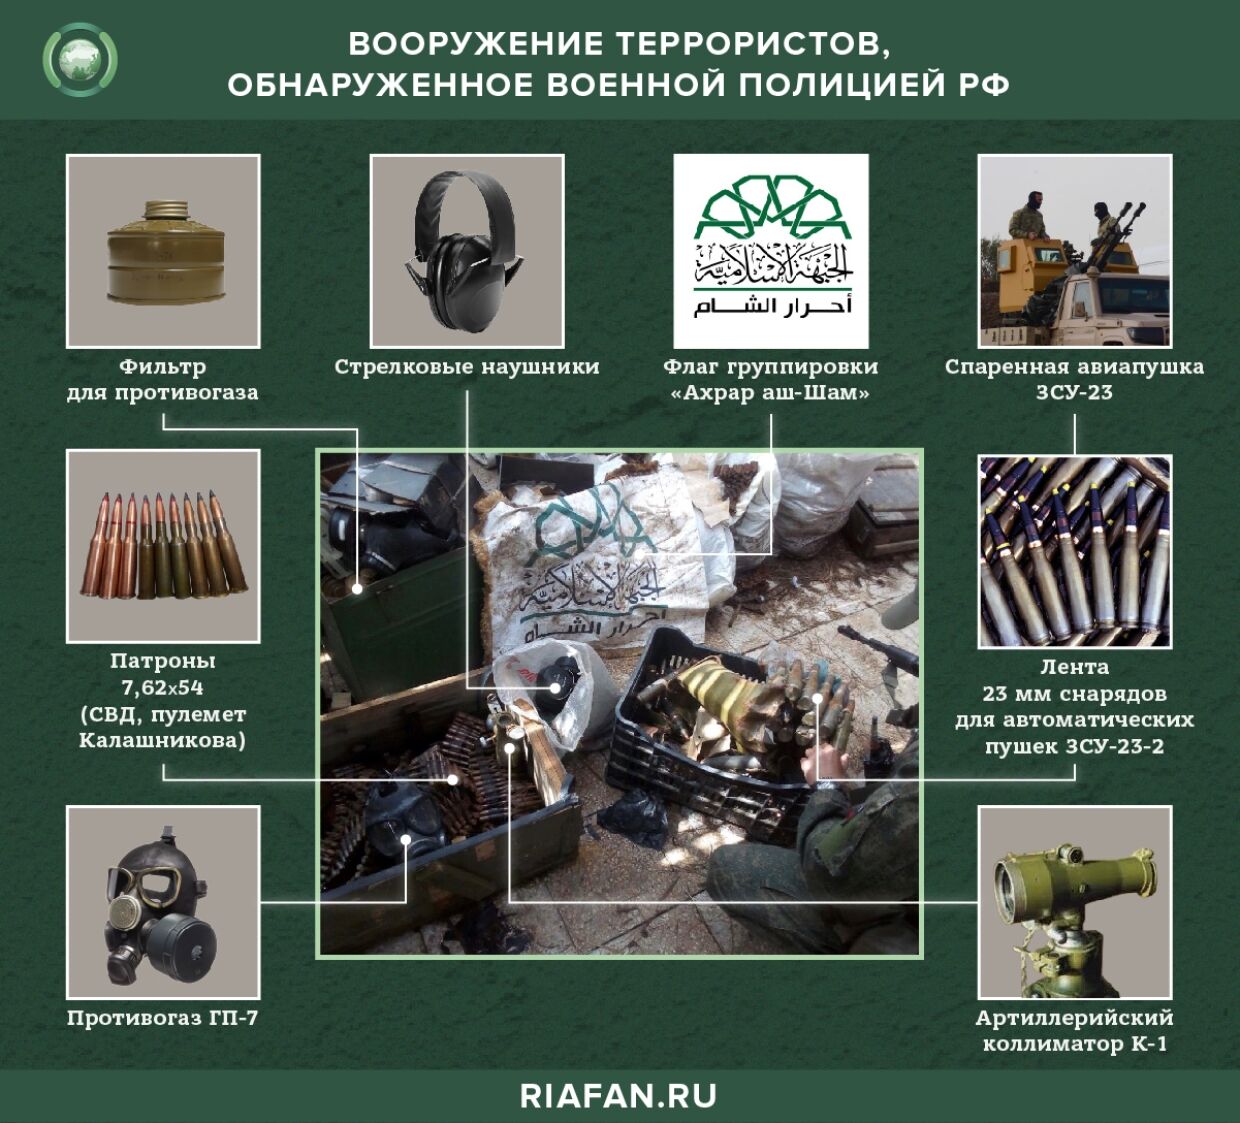 Russian Military Police found a large cache of weapons terrorists near Damascus